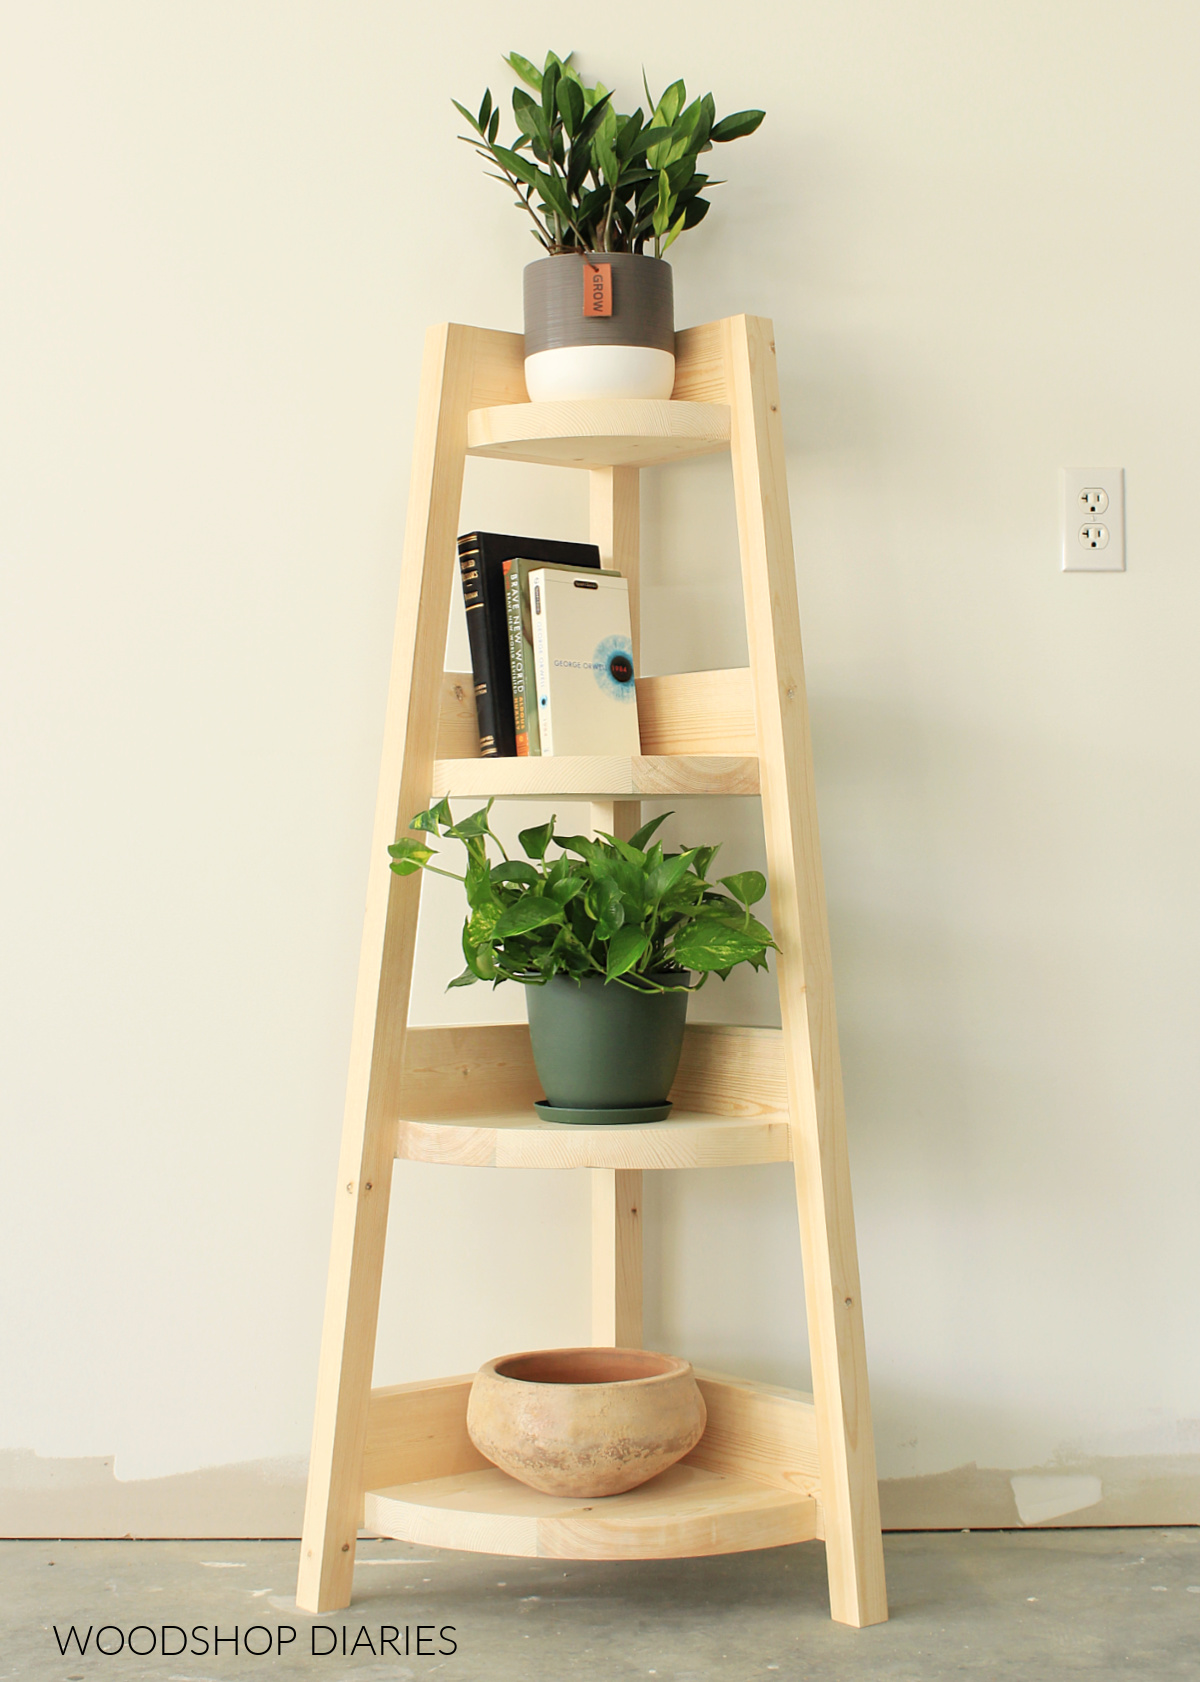 Completed spruce wood corner shelf with rounded shelf boards with books and plants displayed